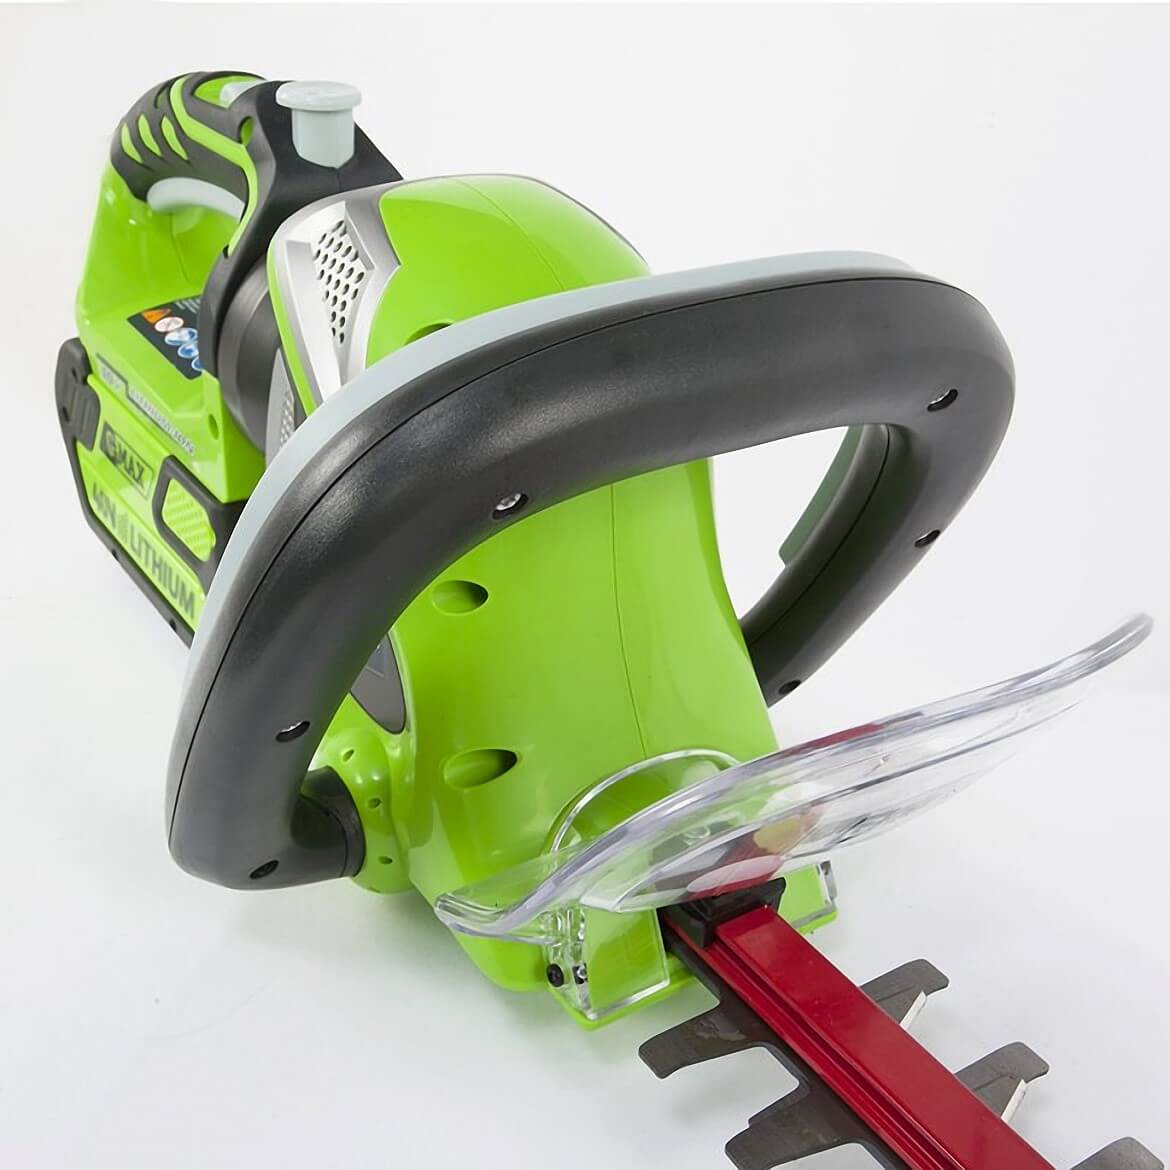 Greenworks 40V 24 Cordless Hedge Trimmer, Tool Only, 1 Cutting Capacity.